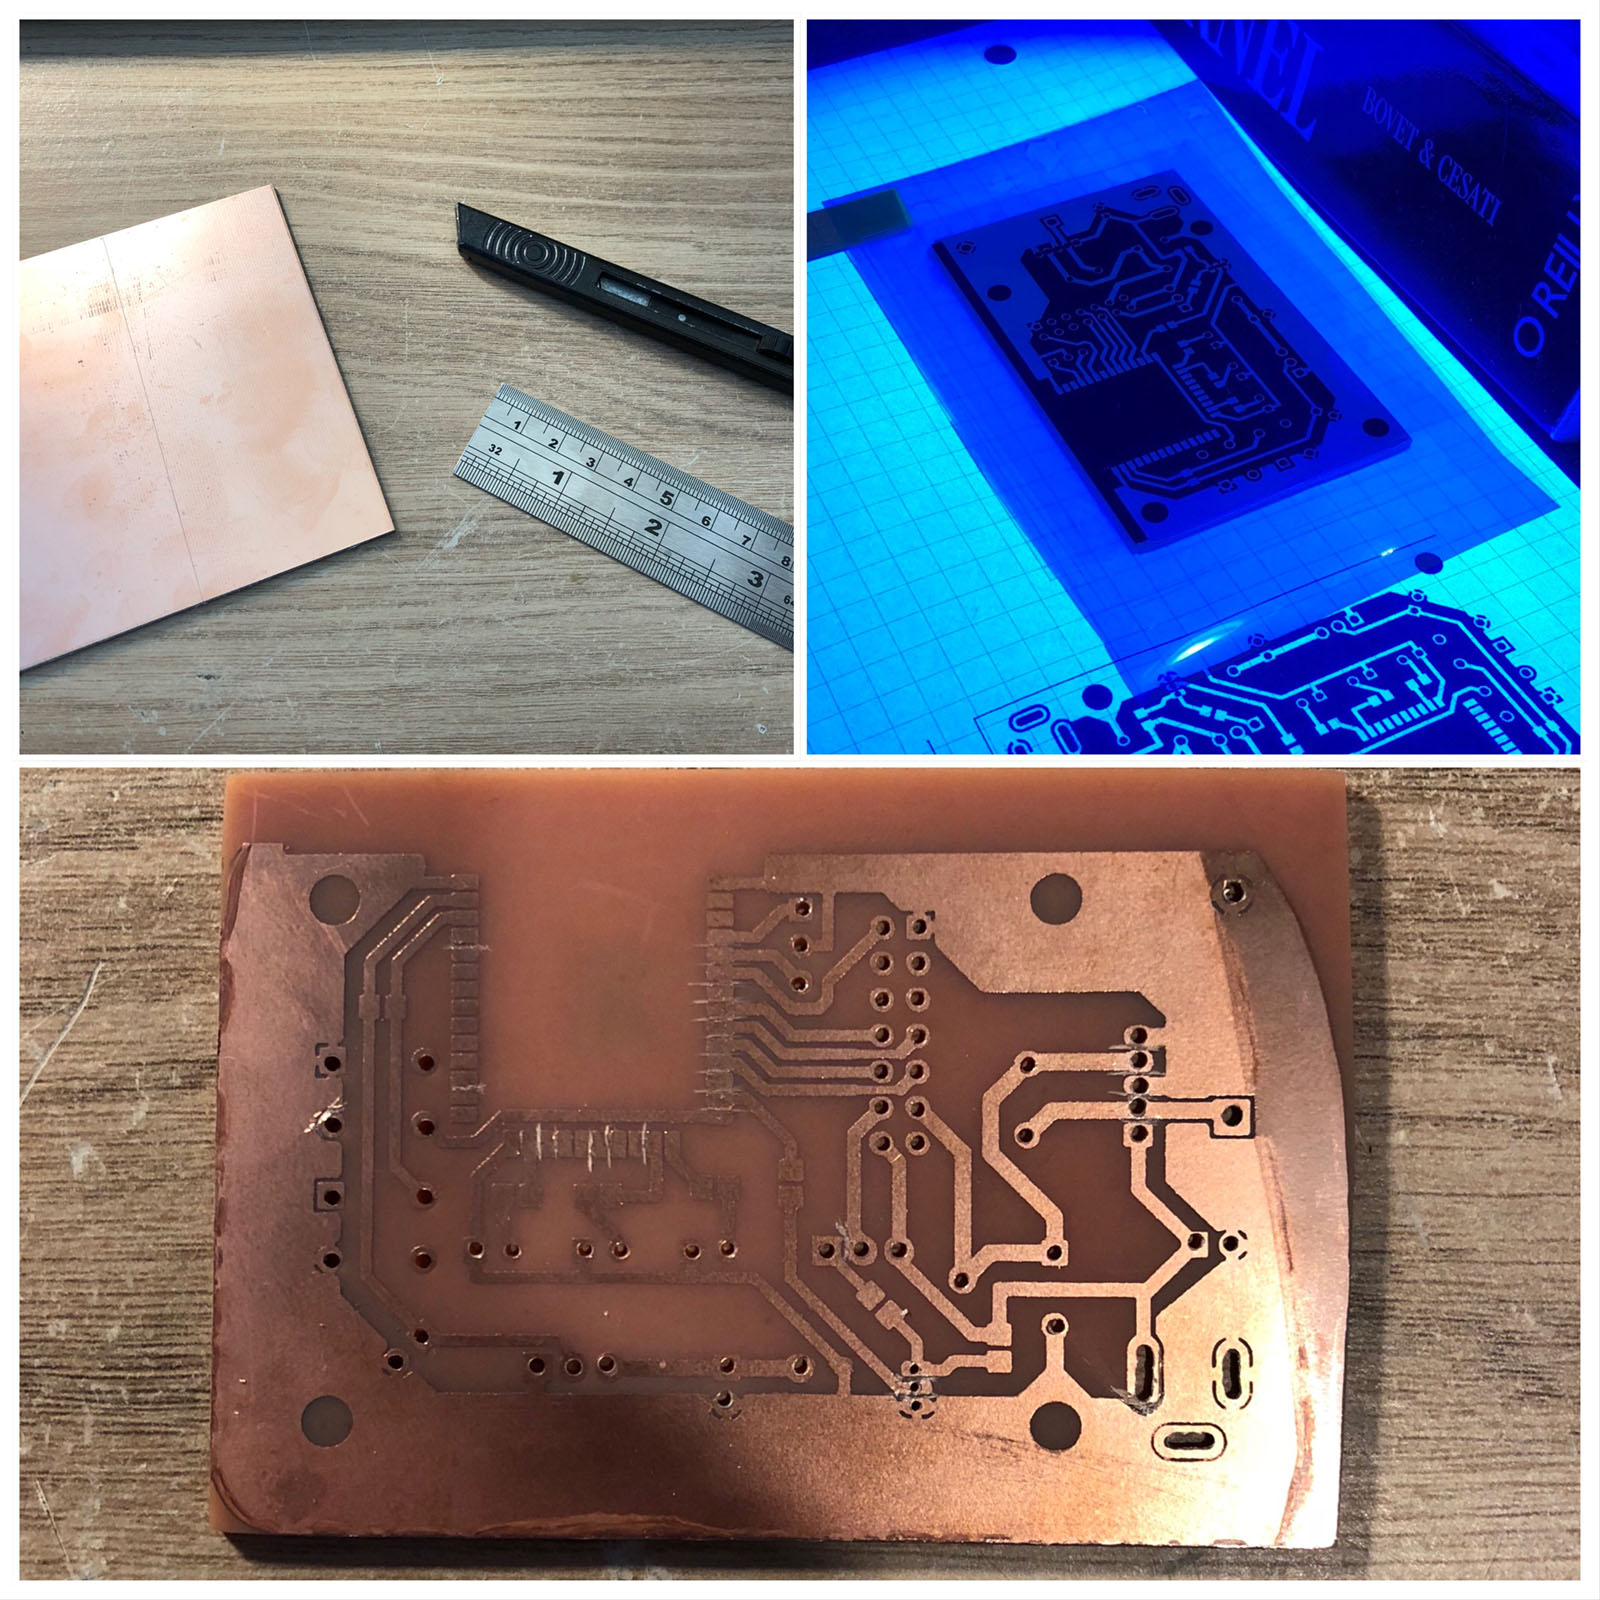 Fabricating the PCB